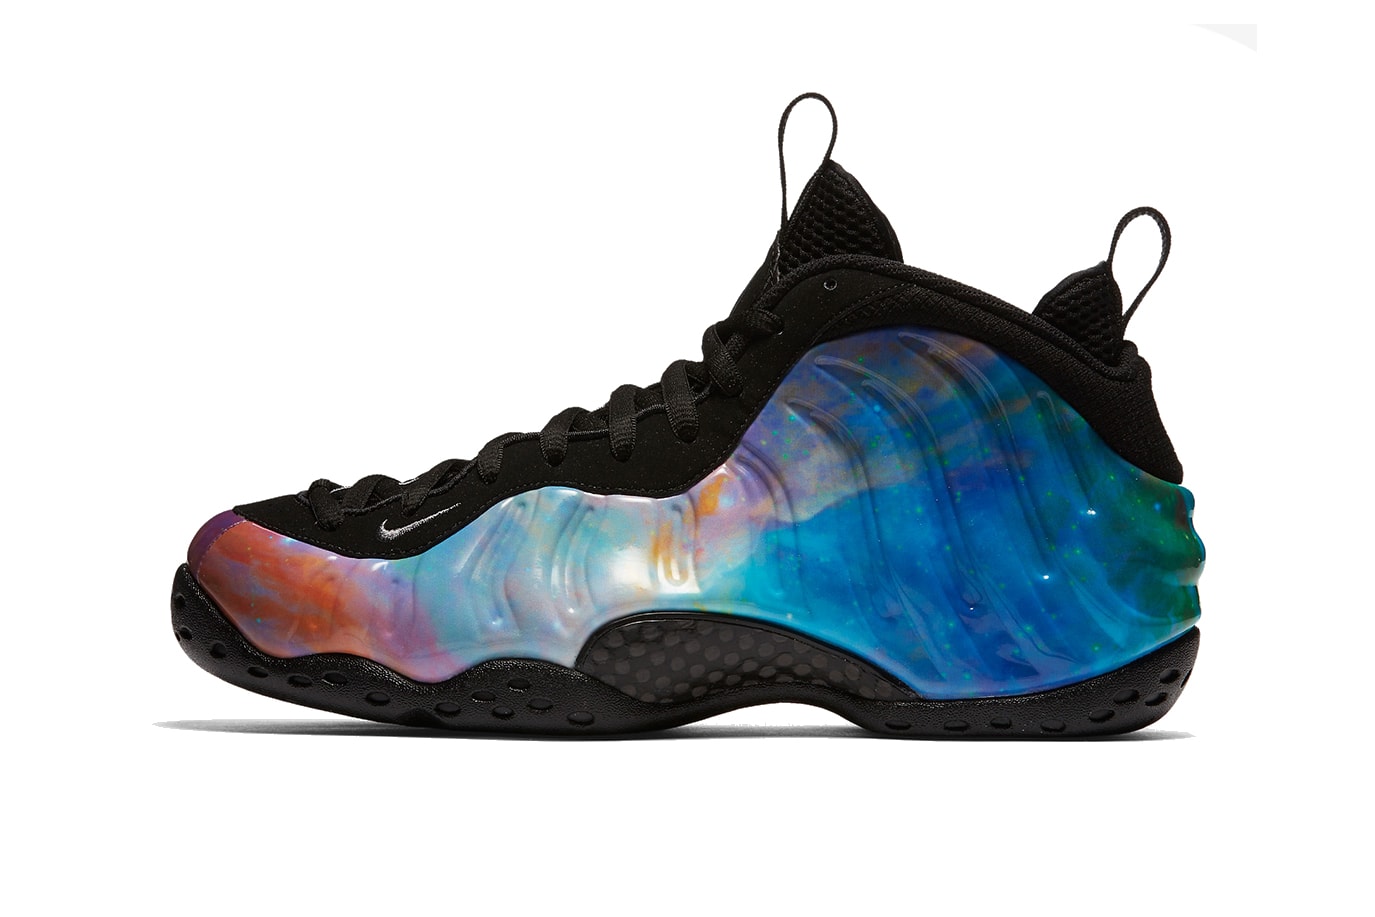 Nike Air Foamposite One Alternate Galaxy Nebula Official Images